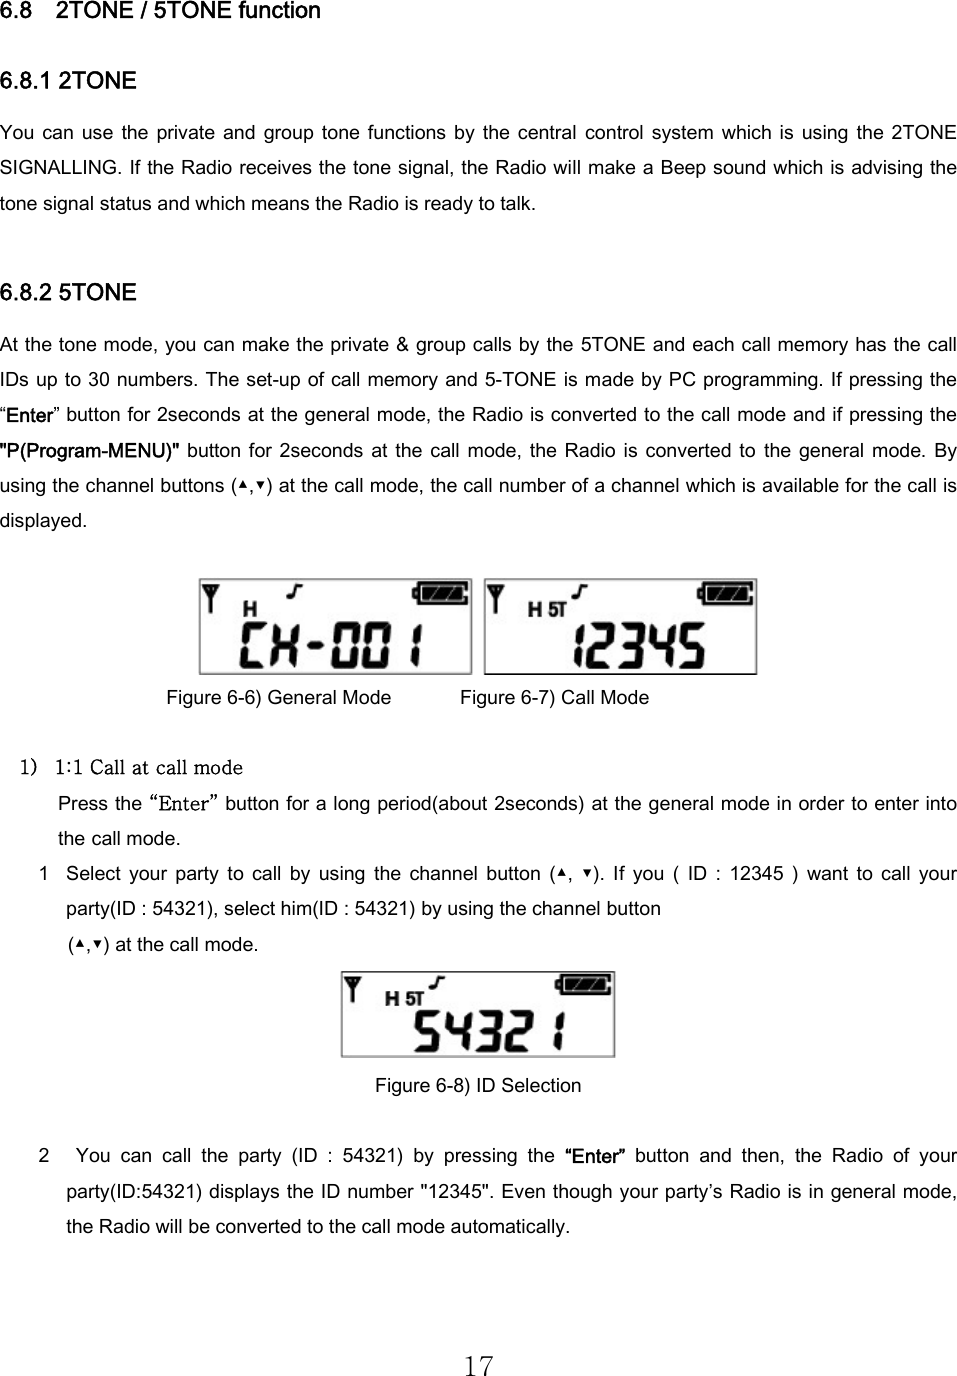 17 6.8    2TONE / 5TONE function 6.8.1 2TONE   You  can  use  the  private  and group  tone functions  by  the central  control  system  which is  using  the 2TONE SIGNALLING. If the Radio receives the tone signal, the Radio will make a Beep sound which is advising the tone signal status and which means the Radio is ready to talk.   6.8.2 5TONE At the tone mode, you can make the private &amp; group calls by the 5TONE and each call memory has the call IDs up to 30 numbers. The set-up of call memory and 5-TONE is made by PC programming. If pressing the “Enter” button for 2seconds at the general mode, the Radio is converted to the call mode and if pressing the &quot;P(Program-MENU)&quot;  button  for  2seconds  at  the  call  mode,  the  Radio  is  converted  to  the  general  mode. By using the channel buttons (▲,▼) at the call mode, the call number of a channel which is available for the call is displayed.       Figure 6-6) General Mode              Figure 6-7) Call Mode  1) 1:1 Call at call mode Press the “Enter” button for a long period(about 2seconds) at the general mode in order to enter into the call mode.  1 Select  your  party  to  call  by  using  the  channel  button  (▲,  ▼).  If  you  (  ID  :  12345  )  want  to  call  your party(ID : 54321), select him(ID : 54321) by using the channel button   (▲,▼) at the call mode.     Figure 6-8) ID Selection    2   You  can  call  the  party  (ID  :  54321)  by  pressing  the  “Enter”  button  and  then,  the  Radio  of  your party(ID:54321) displays the ID number &quot;12345&quot;. Even though your party’s Radio is in general mode, the Radio will be converted to the call mode automatically.  